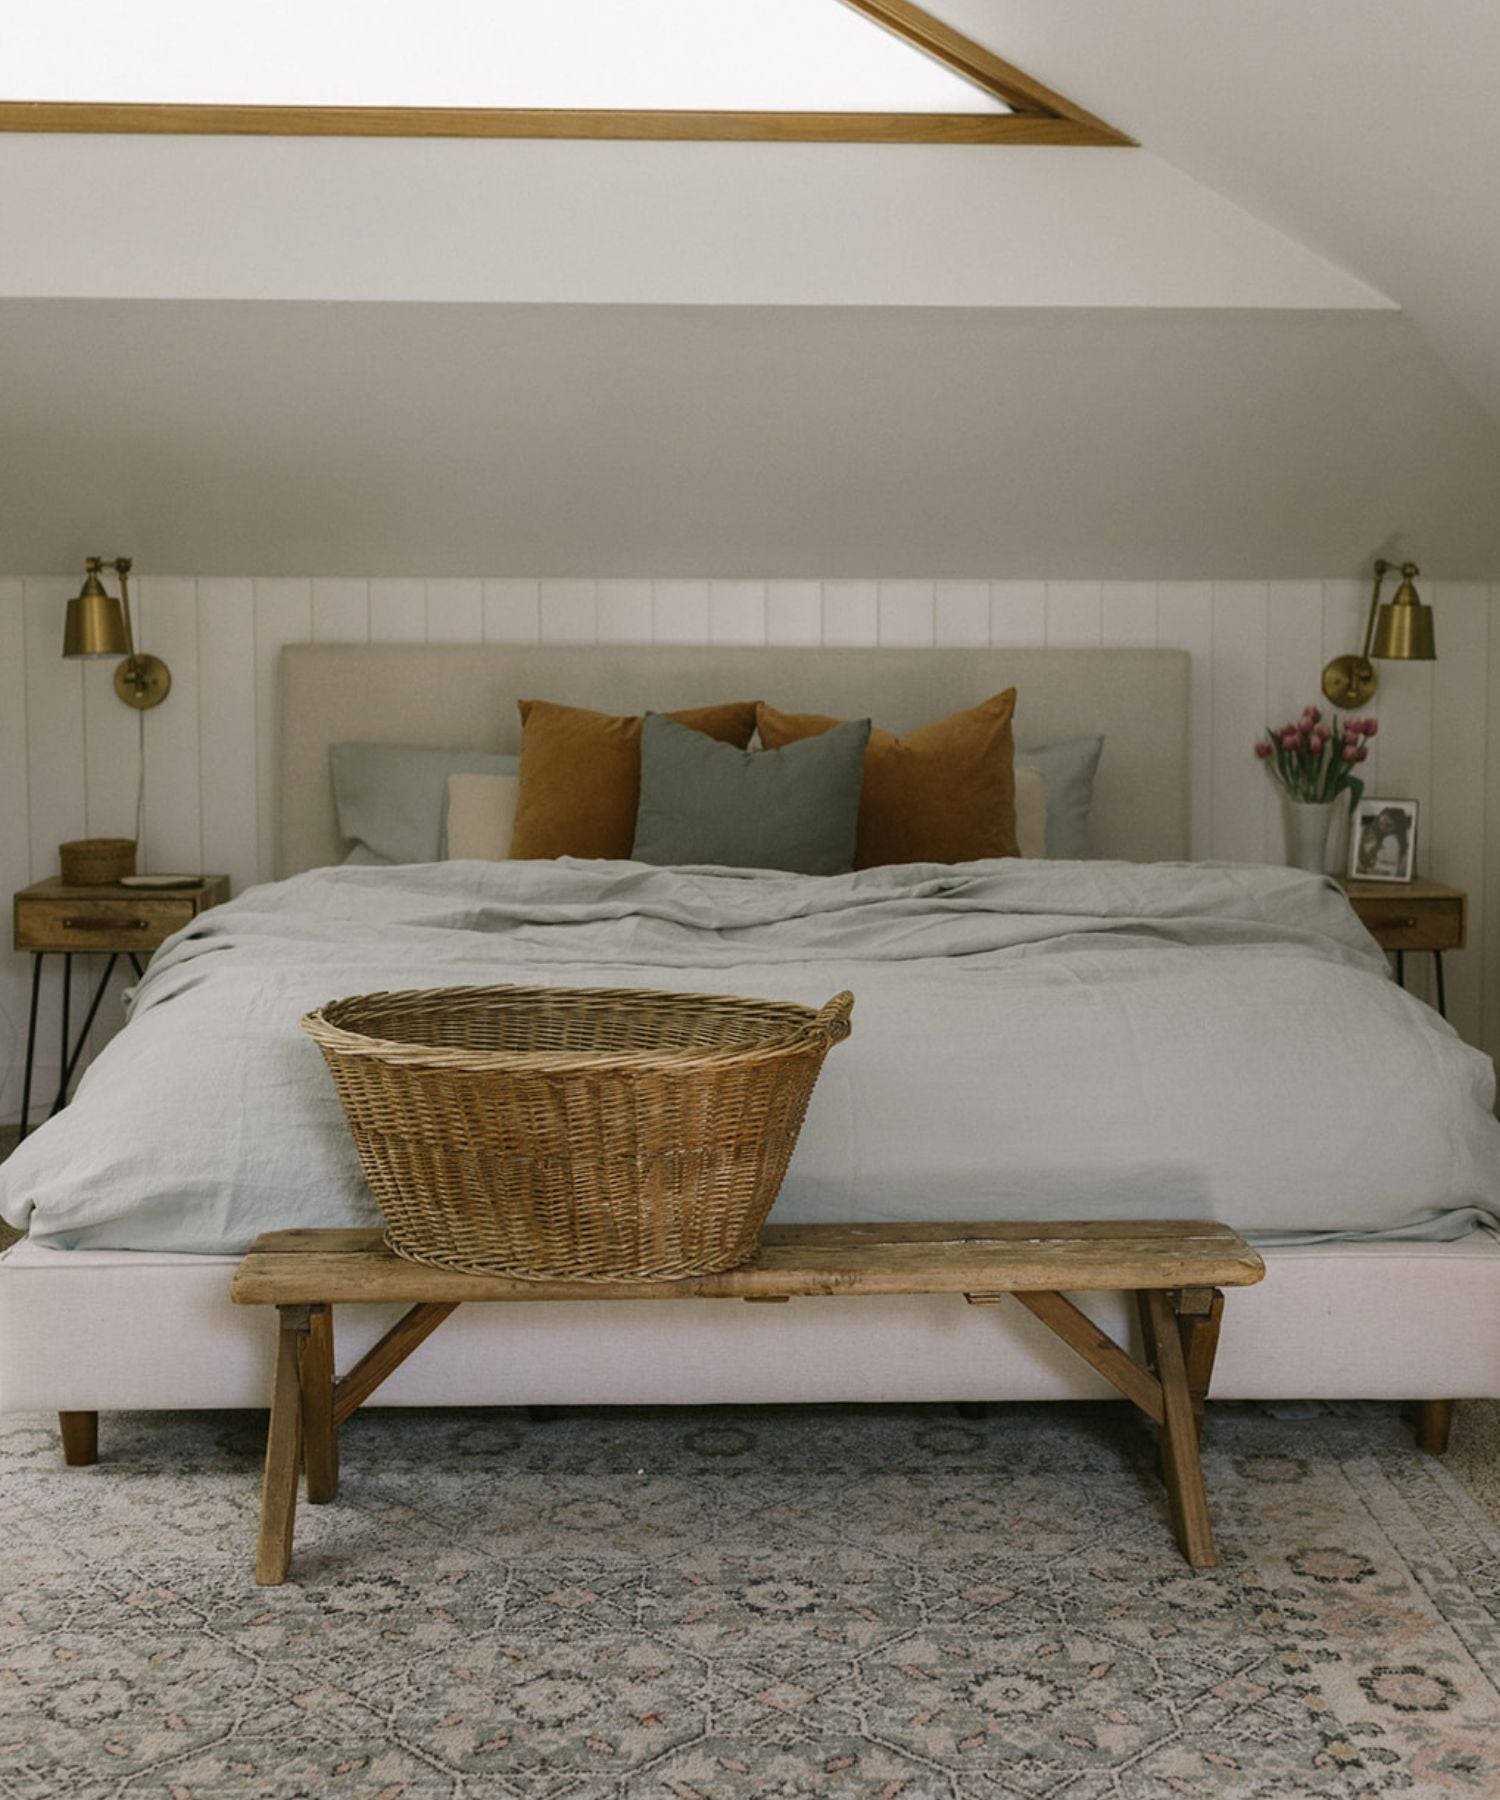 A Bed With Light Blue Linen Bedding Fitting In Rustic Home Decour